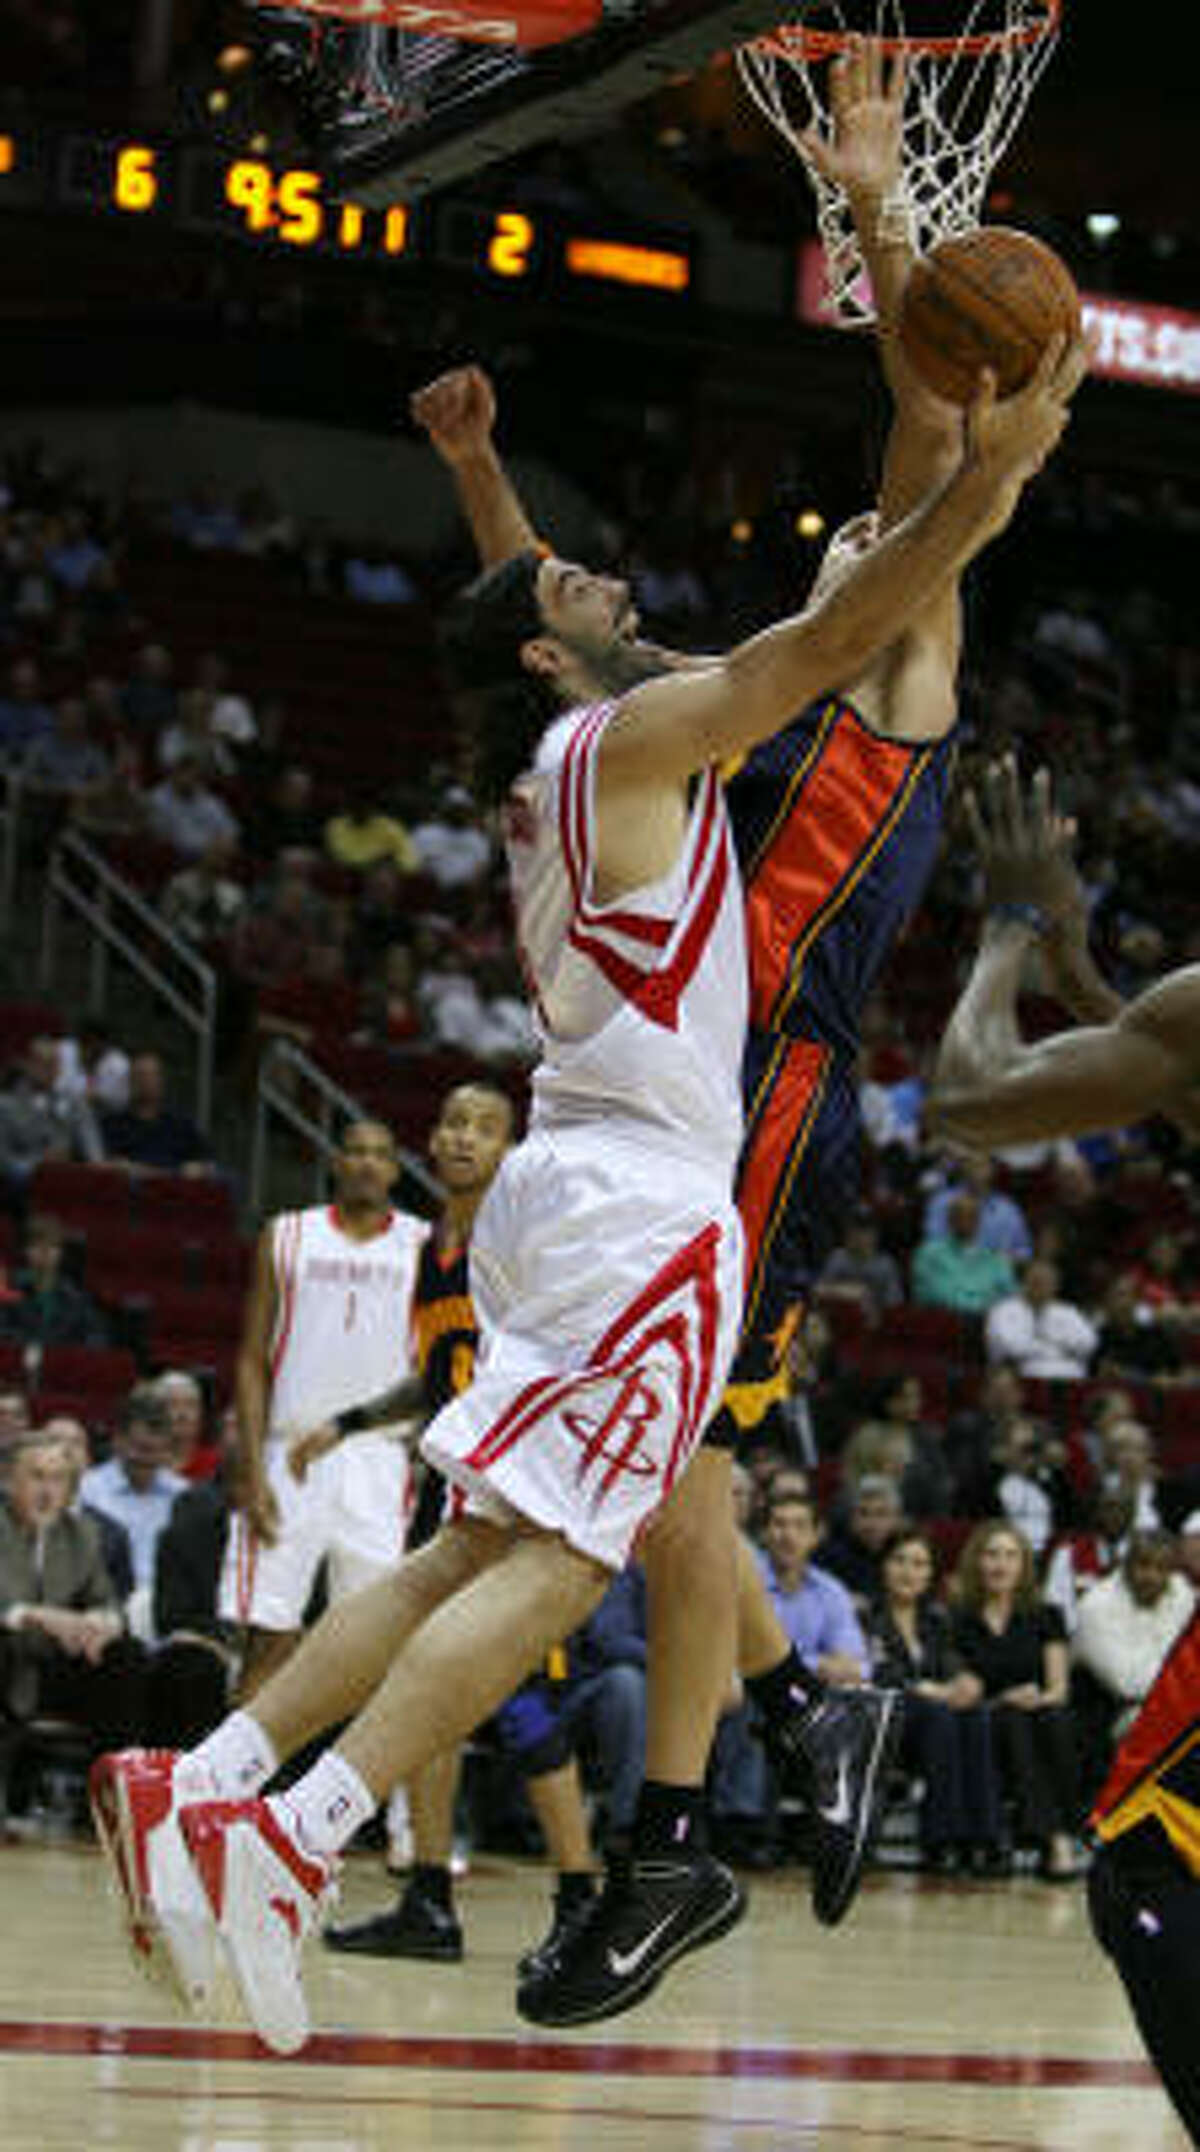 Rockets forward Luis Scola goes up for a reverse layup while Warriors center Andris Biedrins attempts to defend.